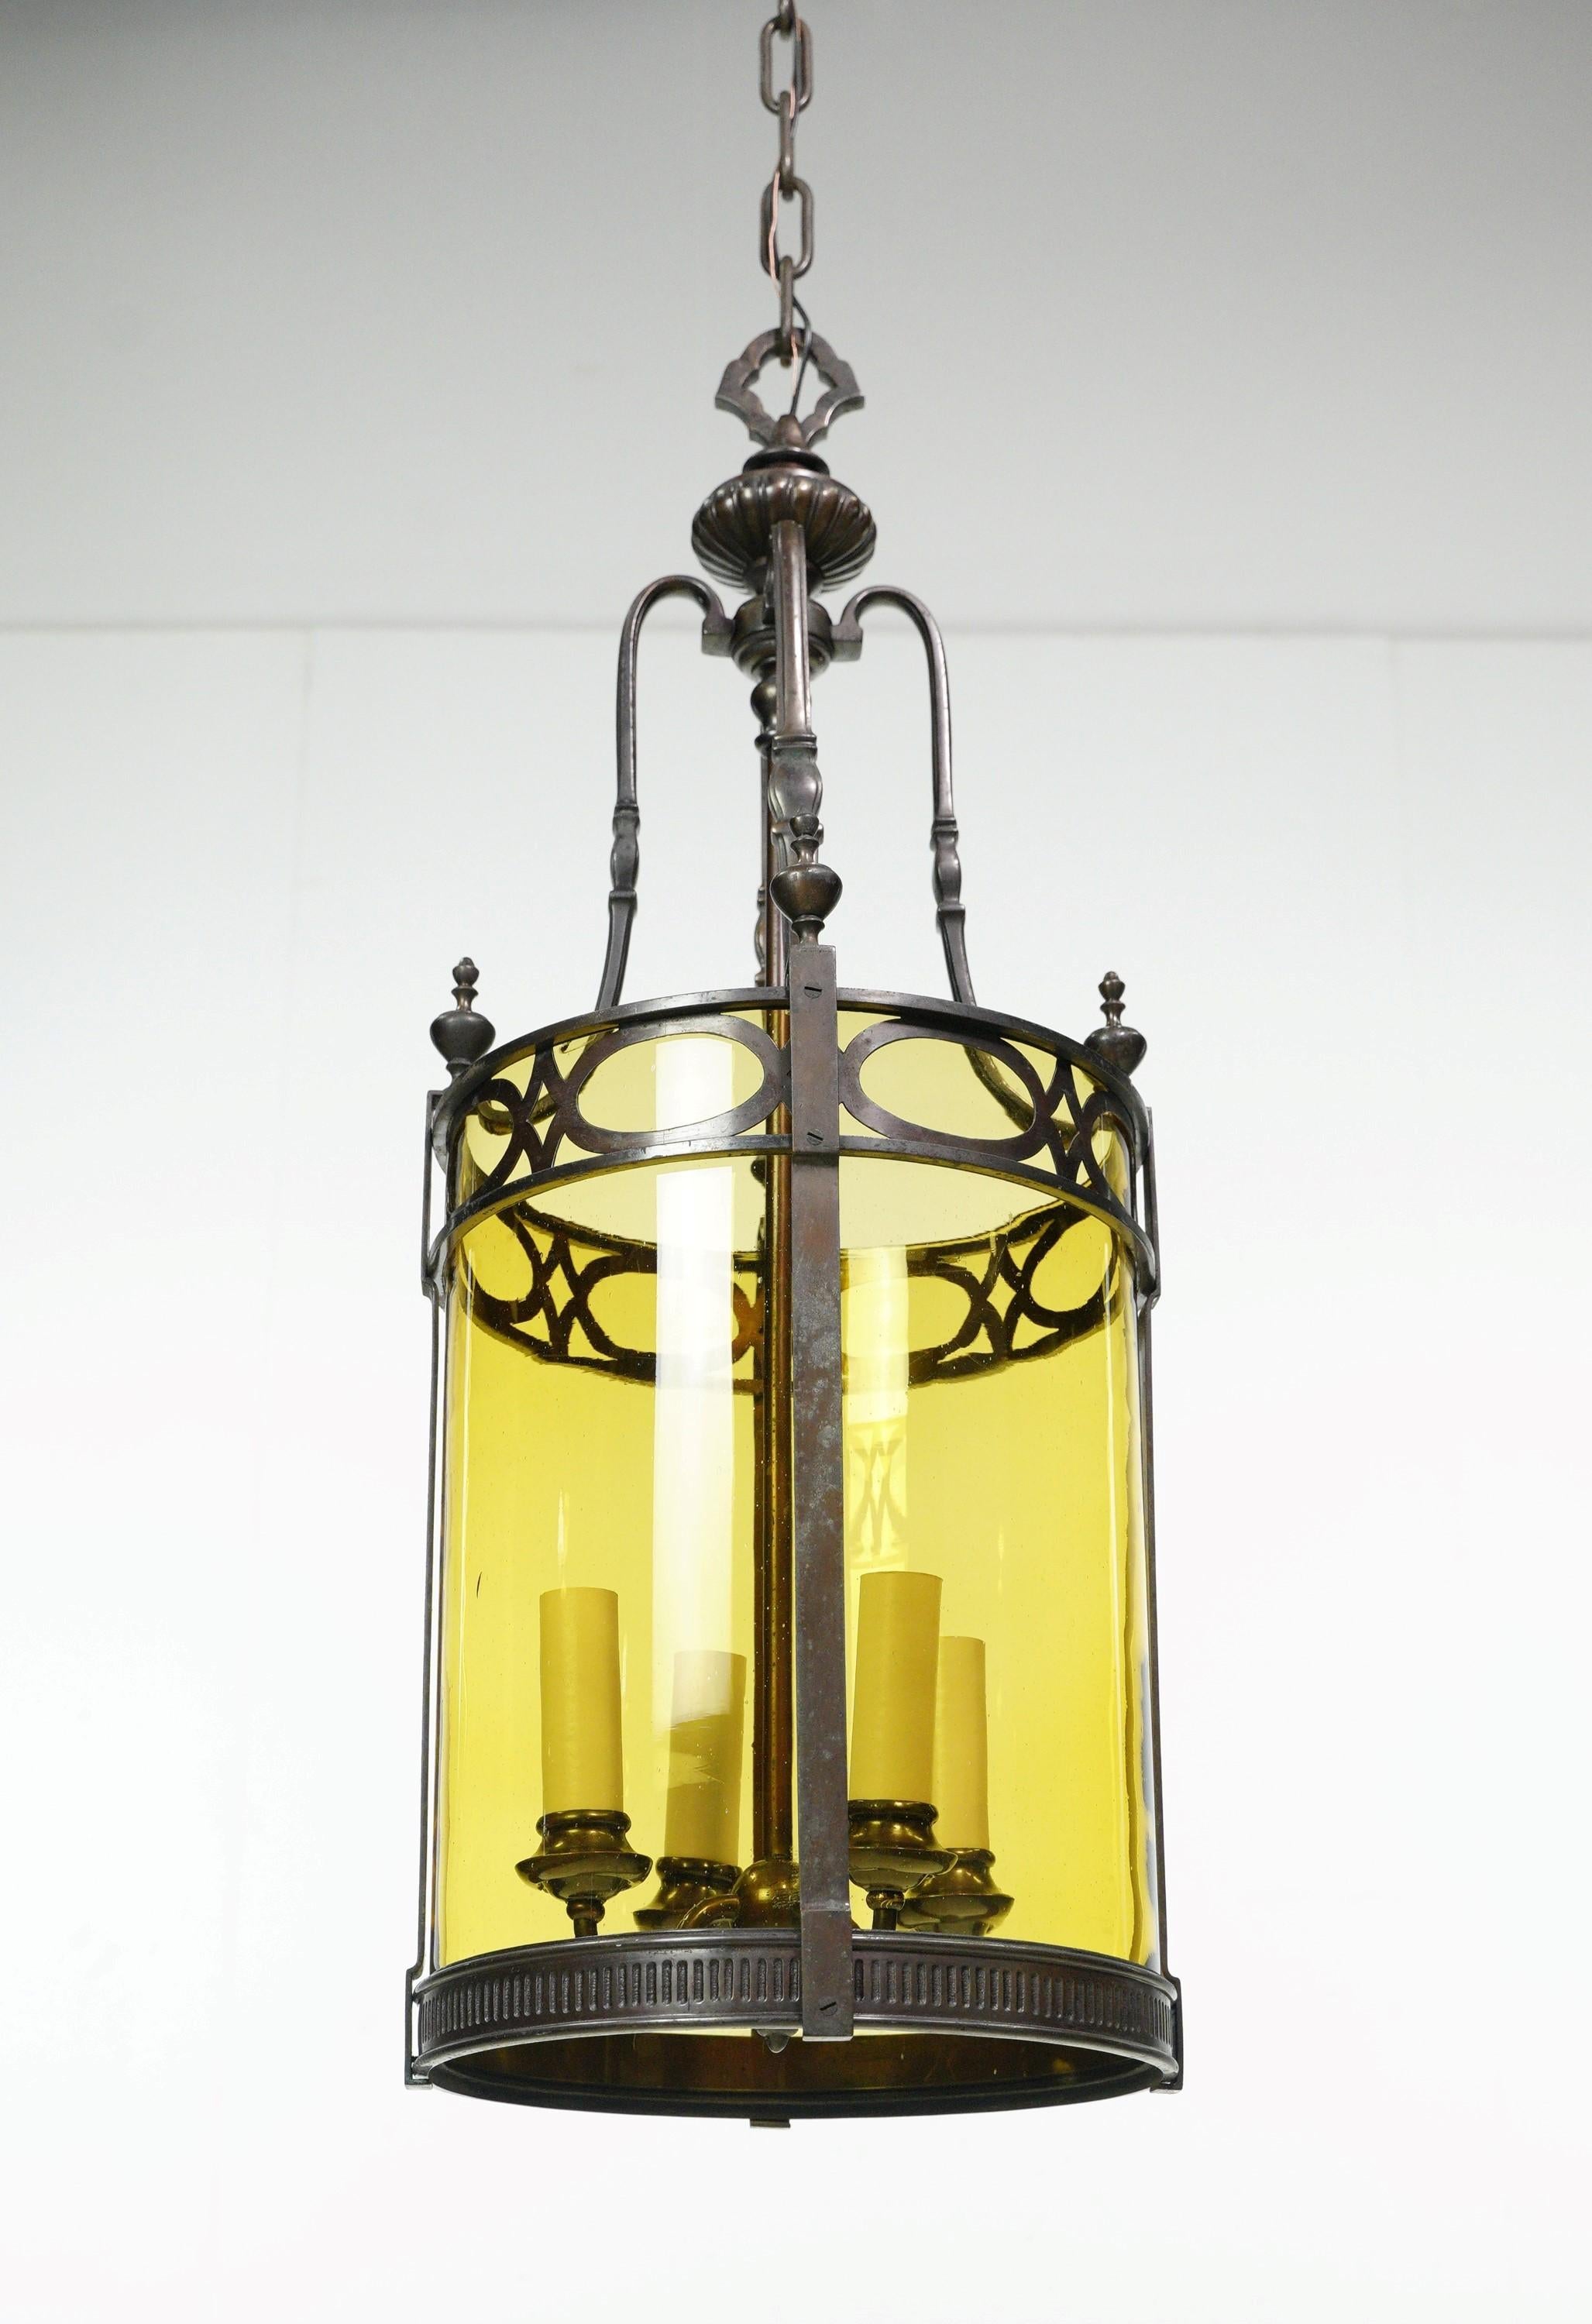 Antique Regency ceiling lantern made of bronze and adorned with amber glass panels. This is a stunning piece that adds vintage charm and warm illumination to any interior with its elegant design. This has four standard medium base sockets. It is in